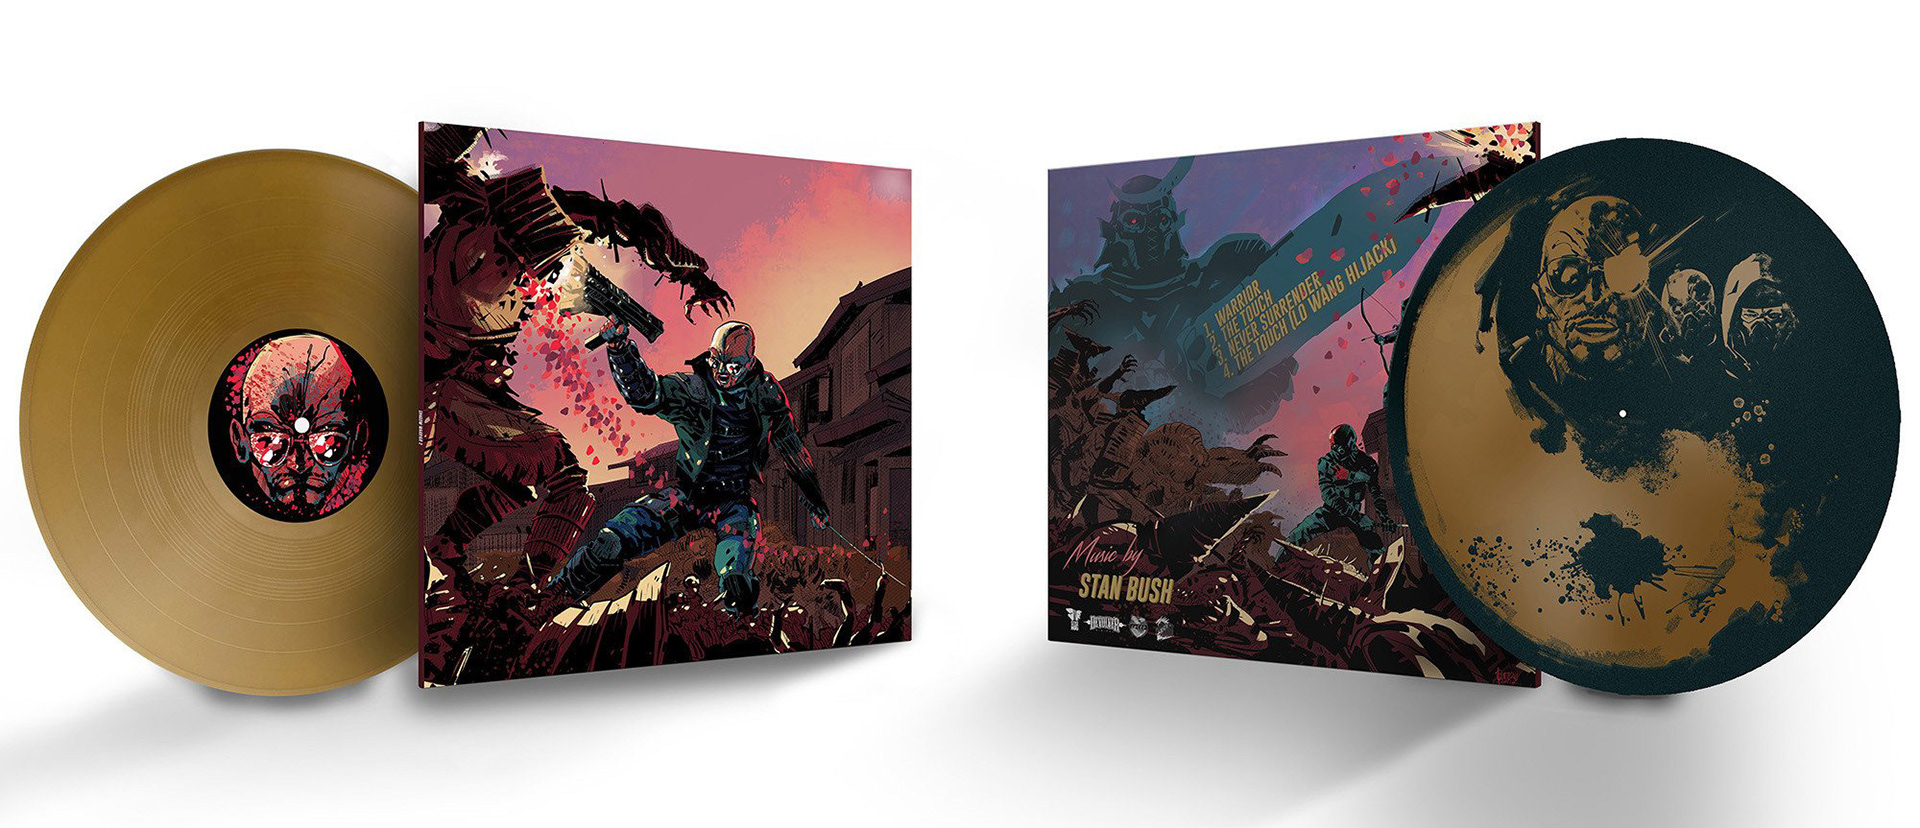 SHADOW WARRIOR 2 'WARRIOR' Vinyl announced featuring new track from iconic  Rockstar STAN BUSH 👾 COSMOCOVER - The best PR agency for video games in  Europe!